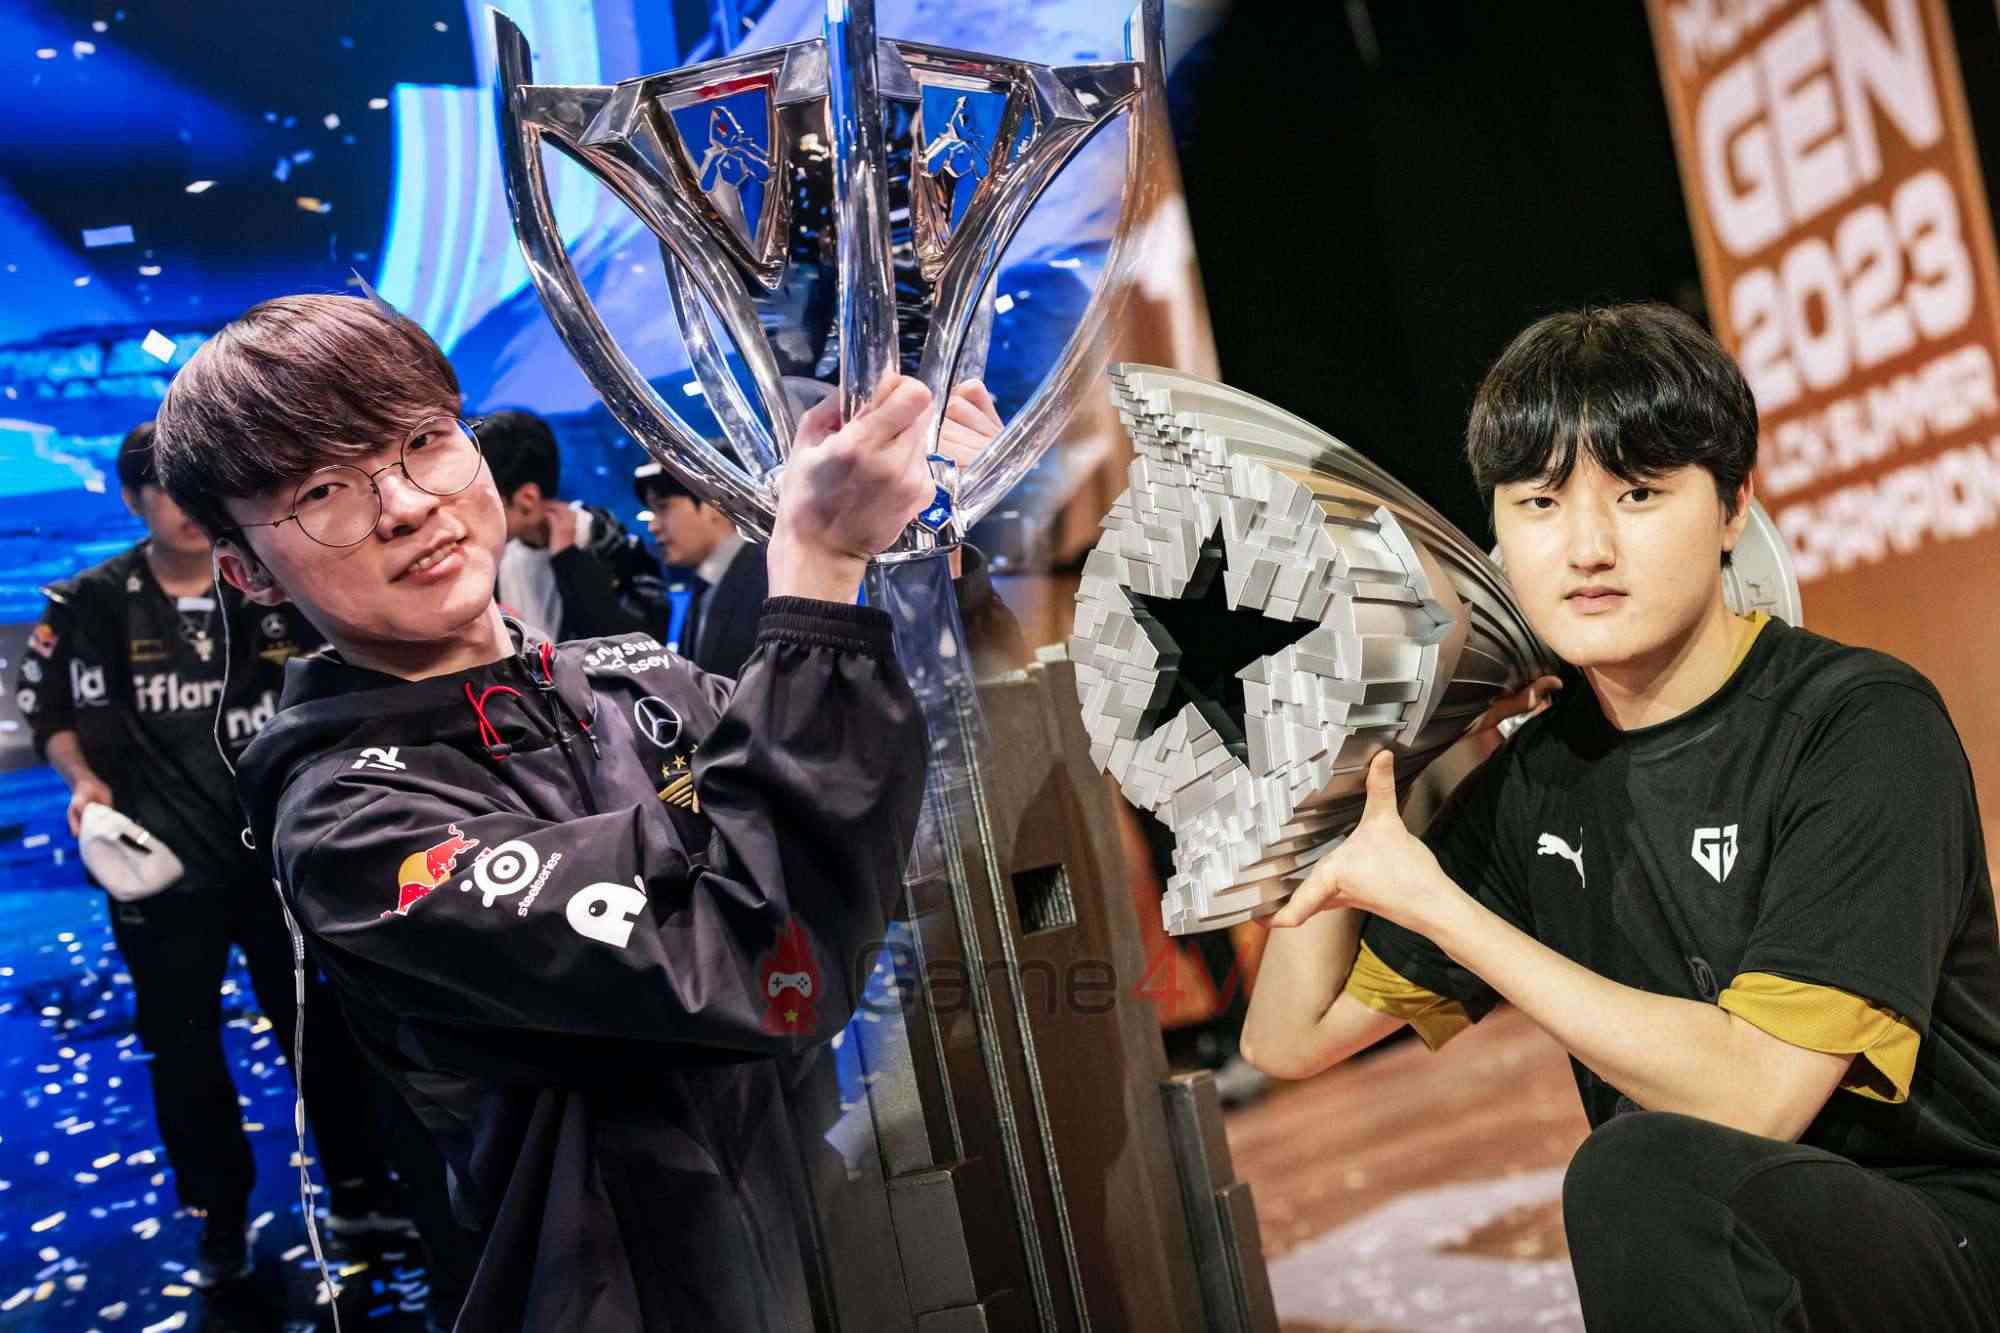 There have been 10 LCK cups but Faker is still maintaining a sky-high win rate in this tournament.